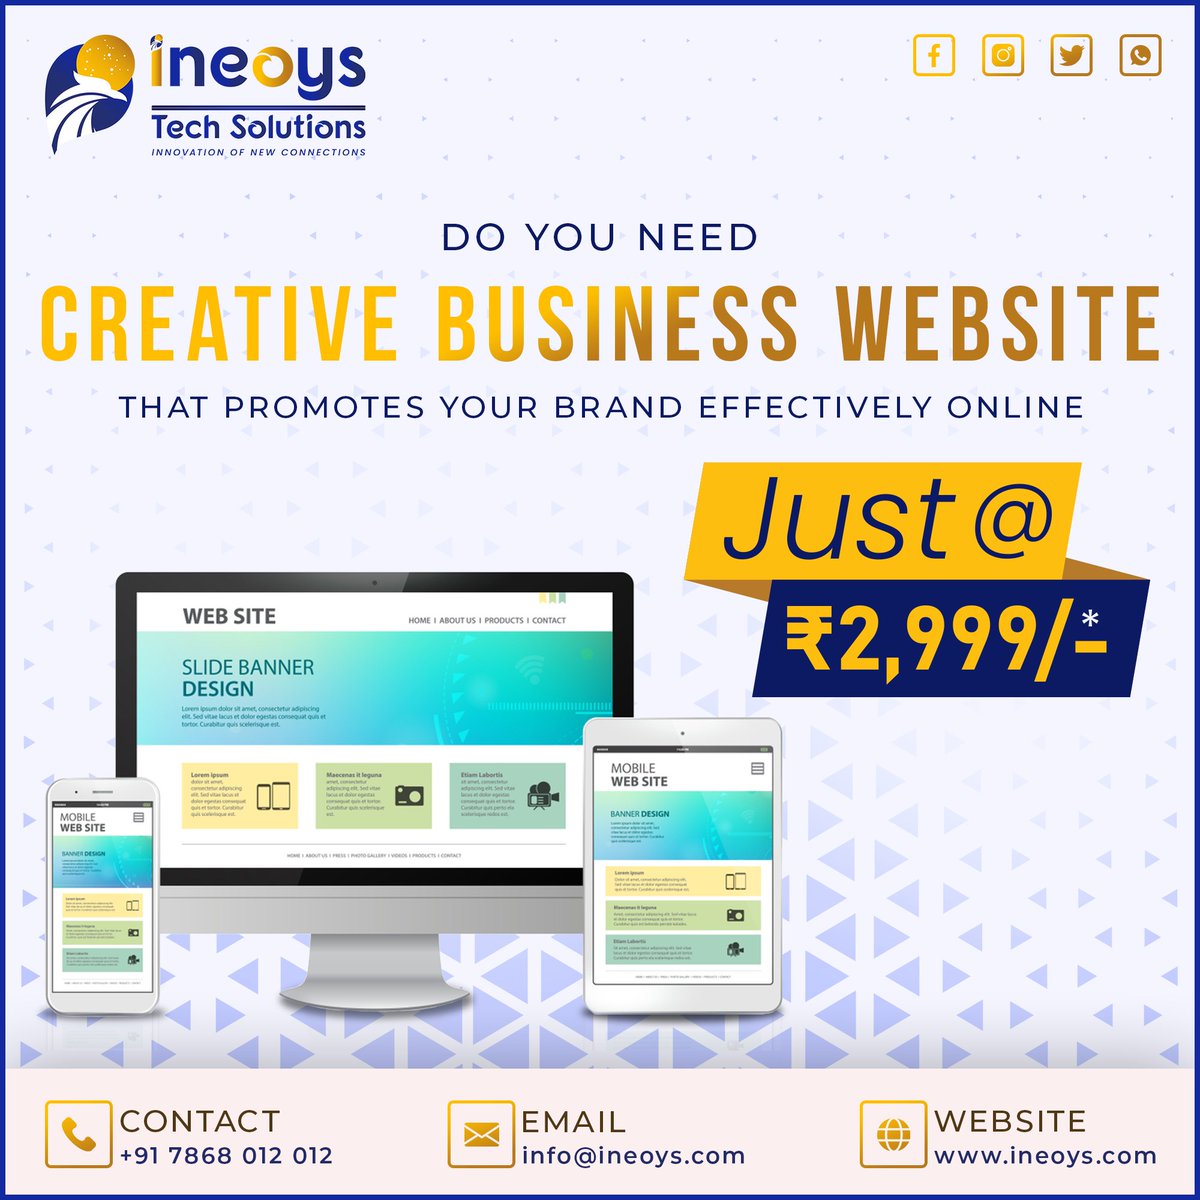 Get your Creative Business Website to standout your Brand in this Digital Era.

#advertising_insta #socialmediaadvertising #mediaagency
#advertising_agency #creativeadvertisingideas #ineoys
#ineoysmadurai #ineoystechsolutionsmadurai